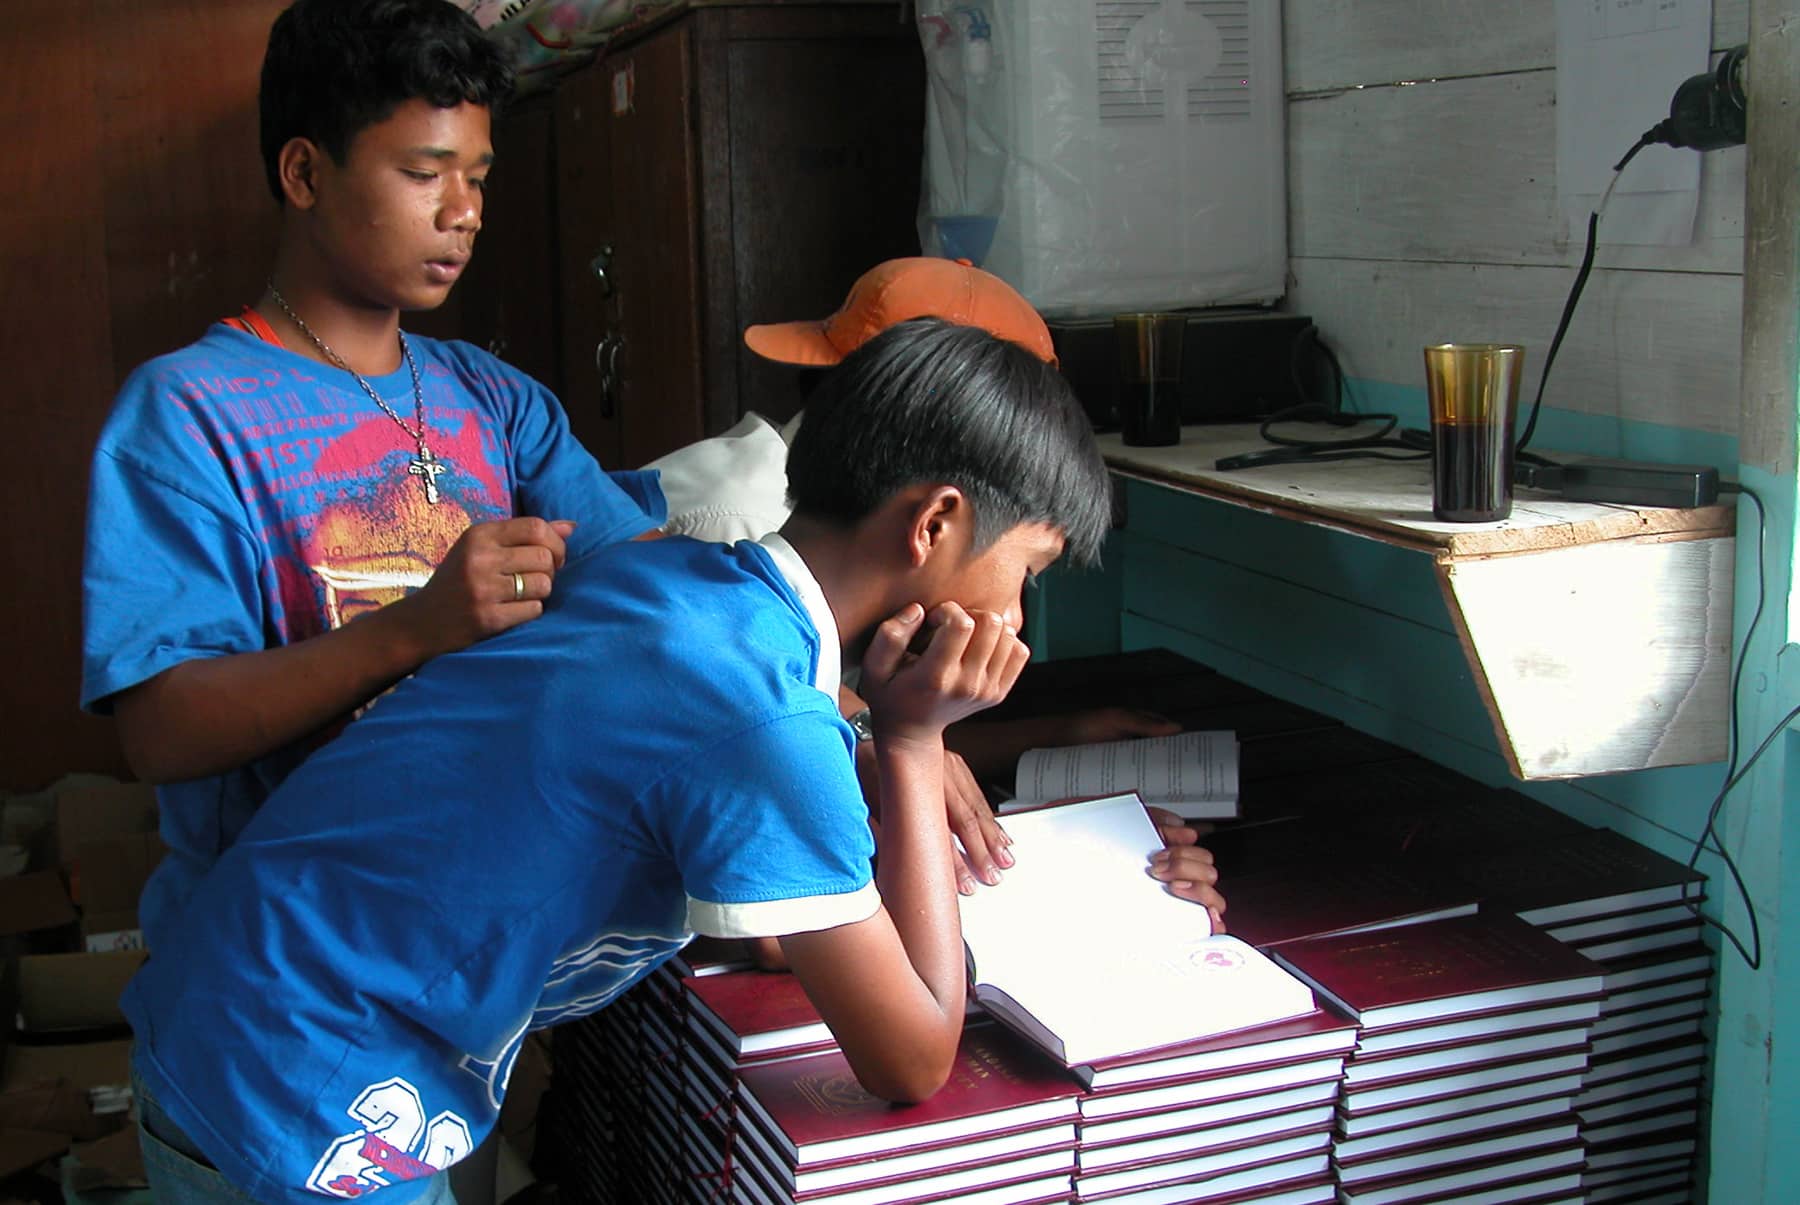 Indonesia Boys Leaning Against Piles Of Luther's Small Catechisms